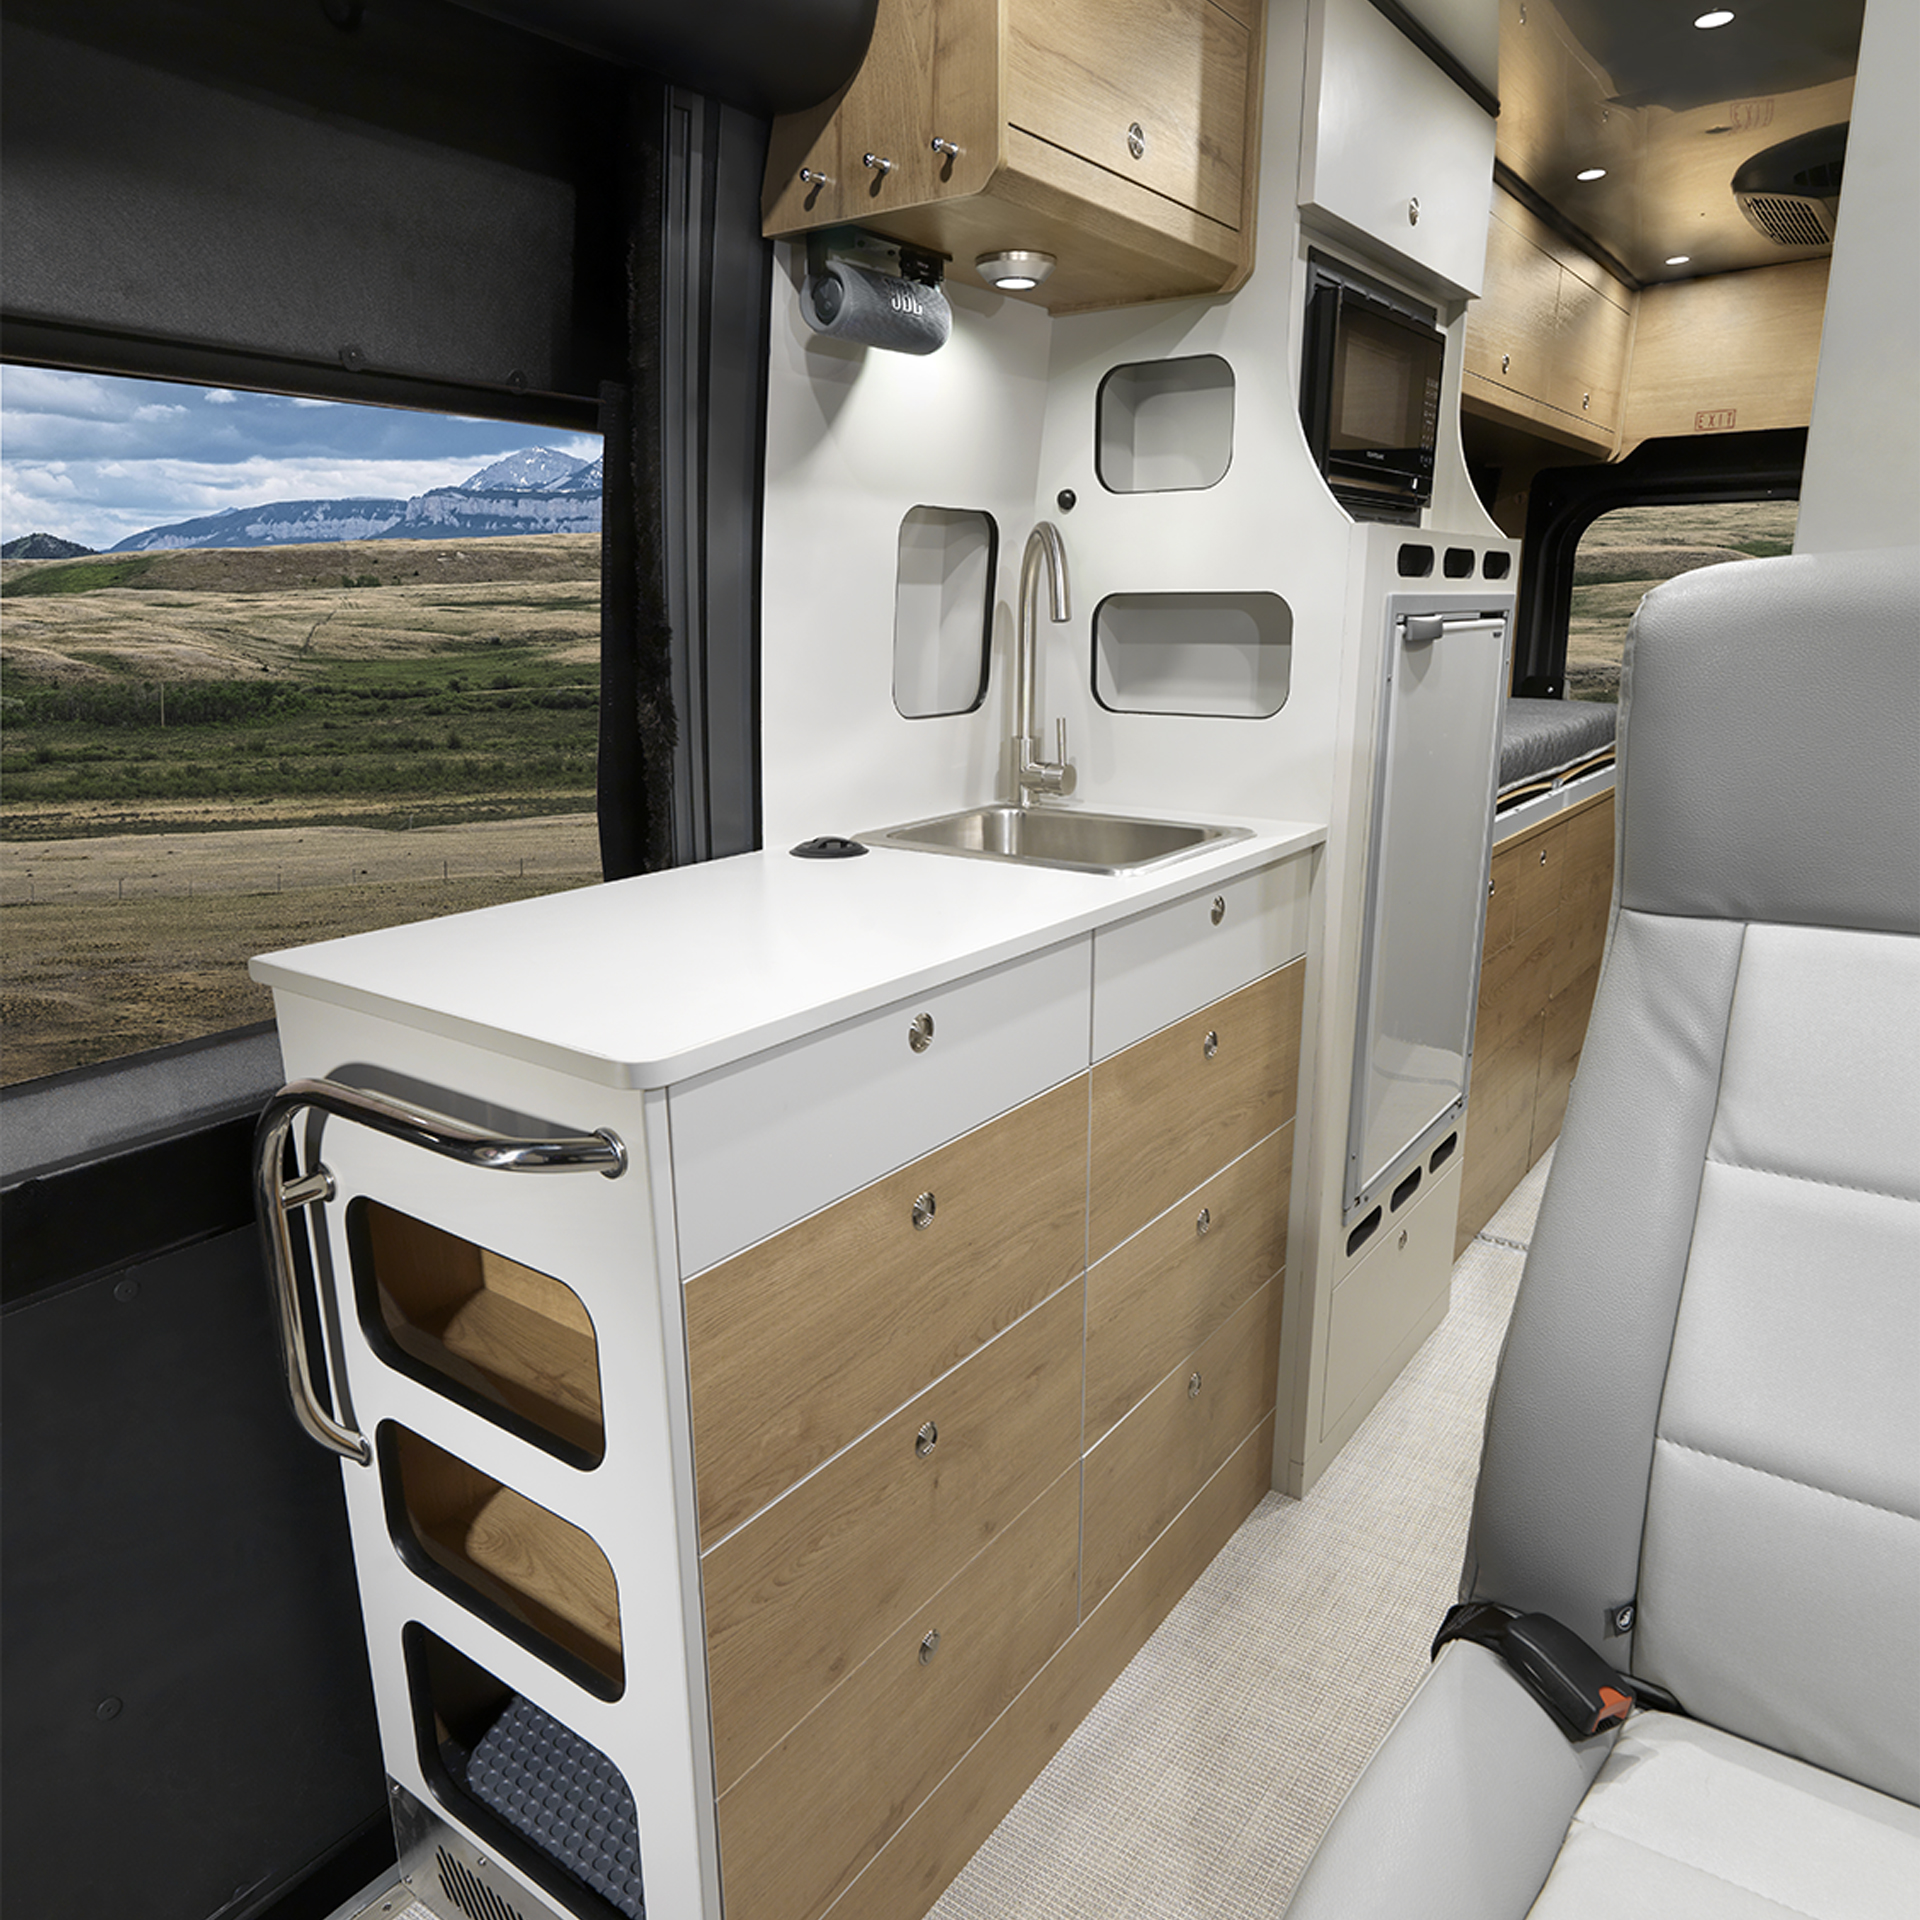 The interior kitchen of the Airstream Rangeline Touring Coach with light colored cabinets and white countertops